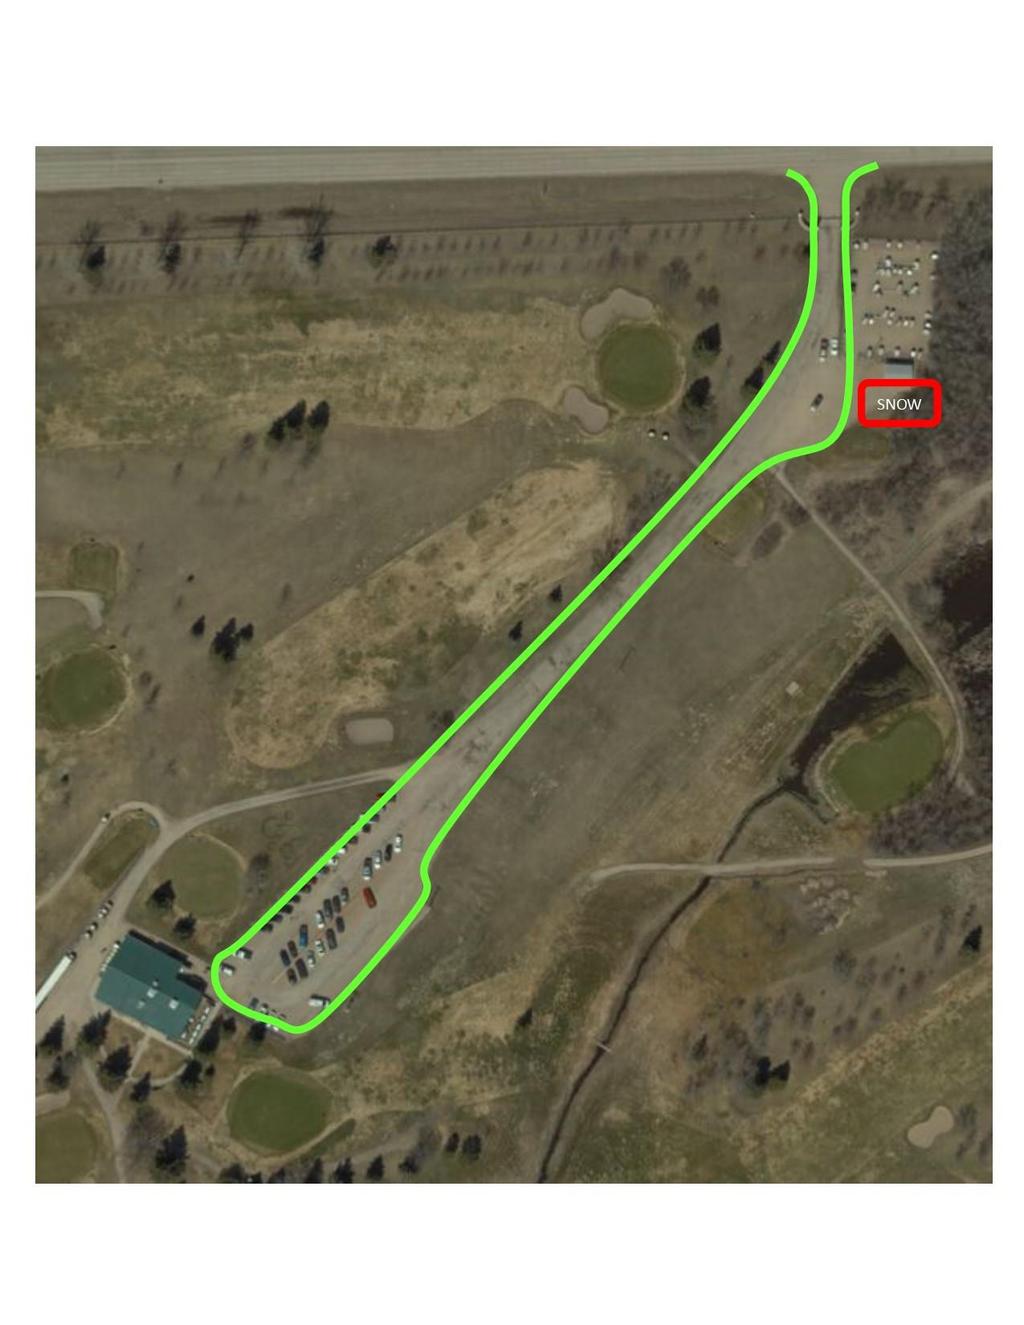 Deer Park Golf Course Highway 52 West Specifications: 1. Clearing is to provide one lane of access to the clubhouse only. 2. Clearing of the complete parking area is not required. 3.